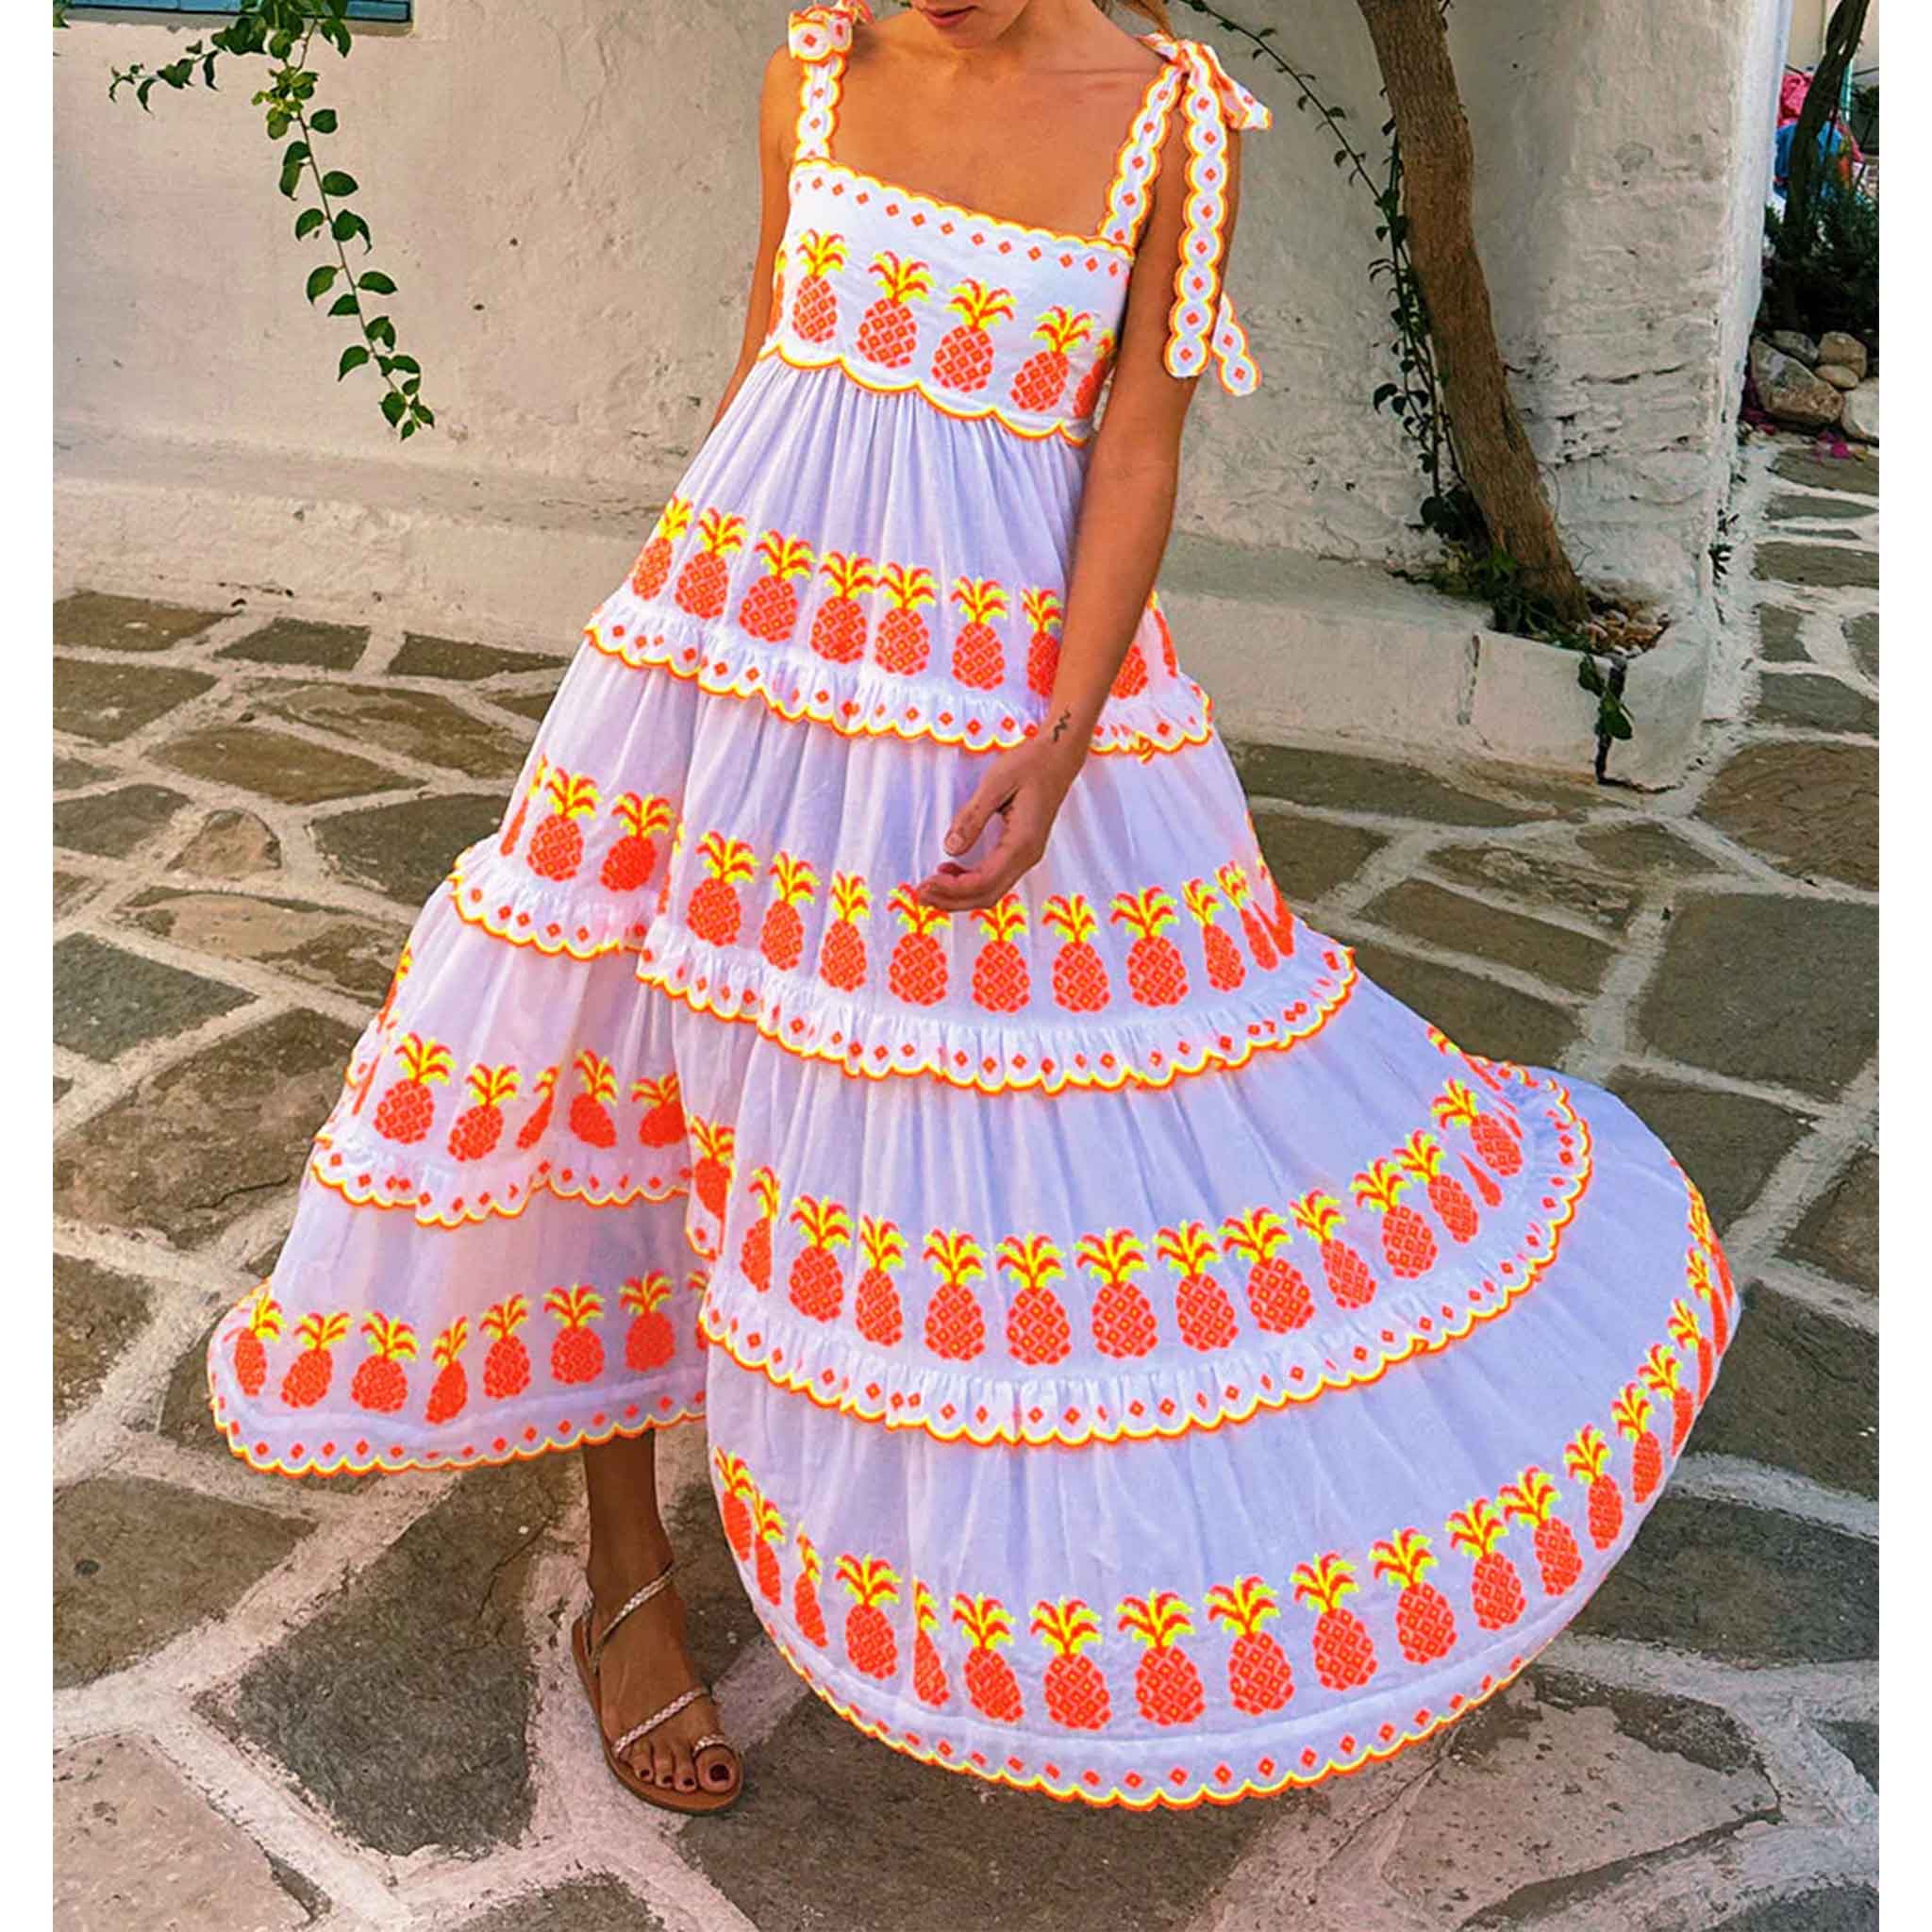 Athens Dress in Pineapple Stitch